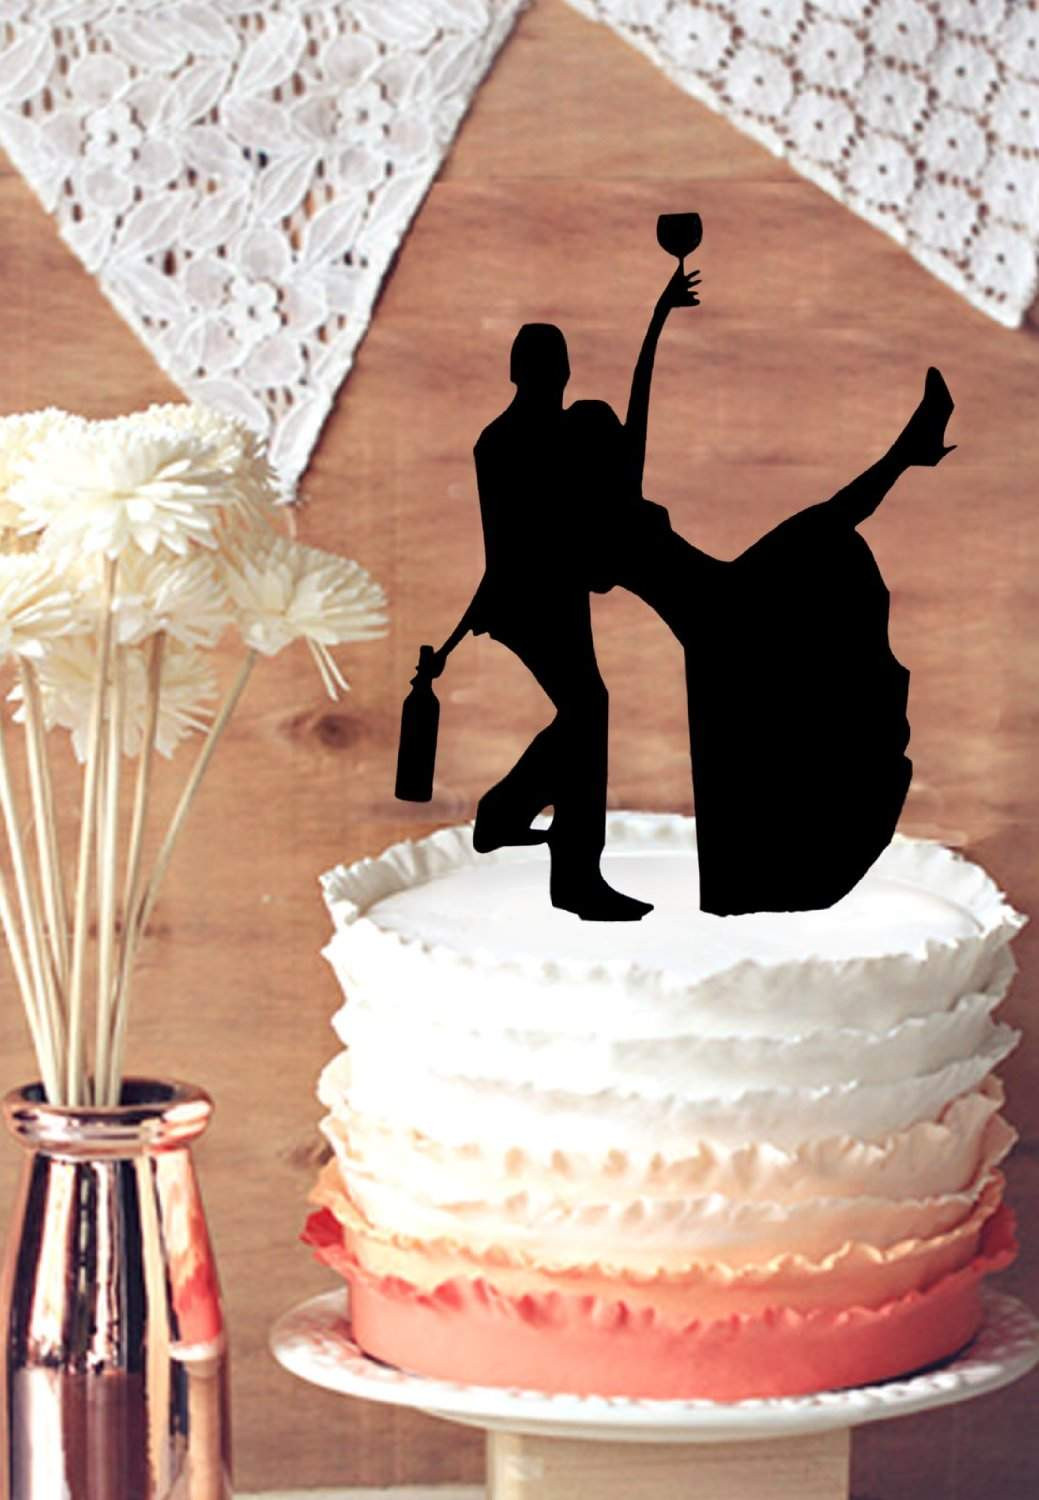 Wedding Cakes Top
 11 Funny Wedding Toppers for Your Cake 2018